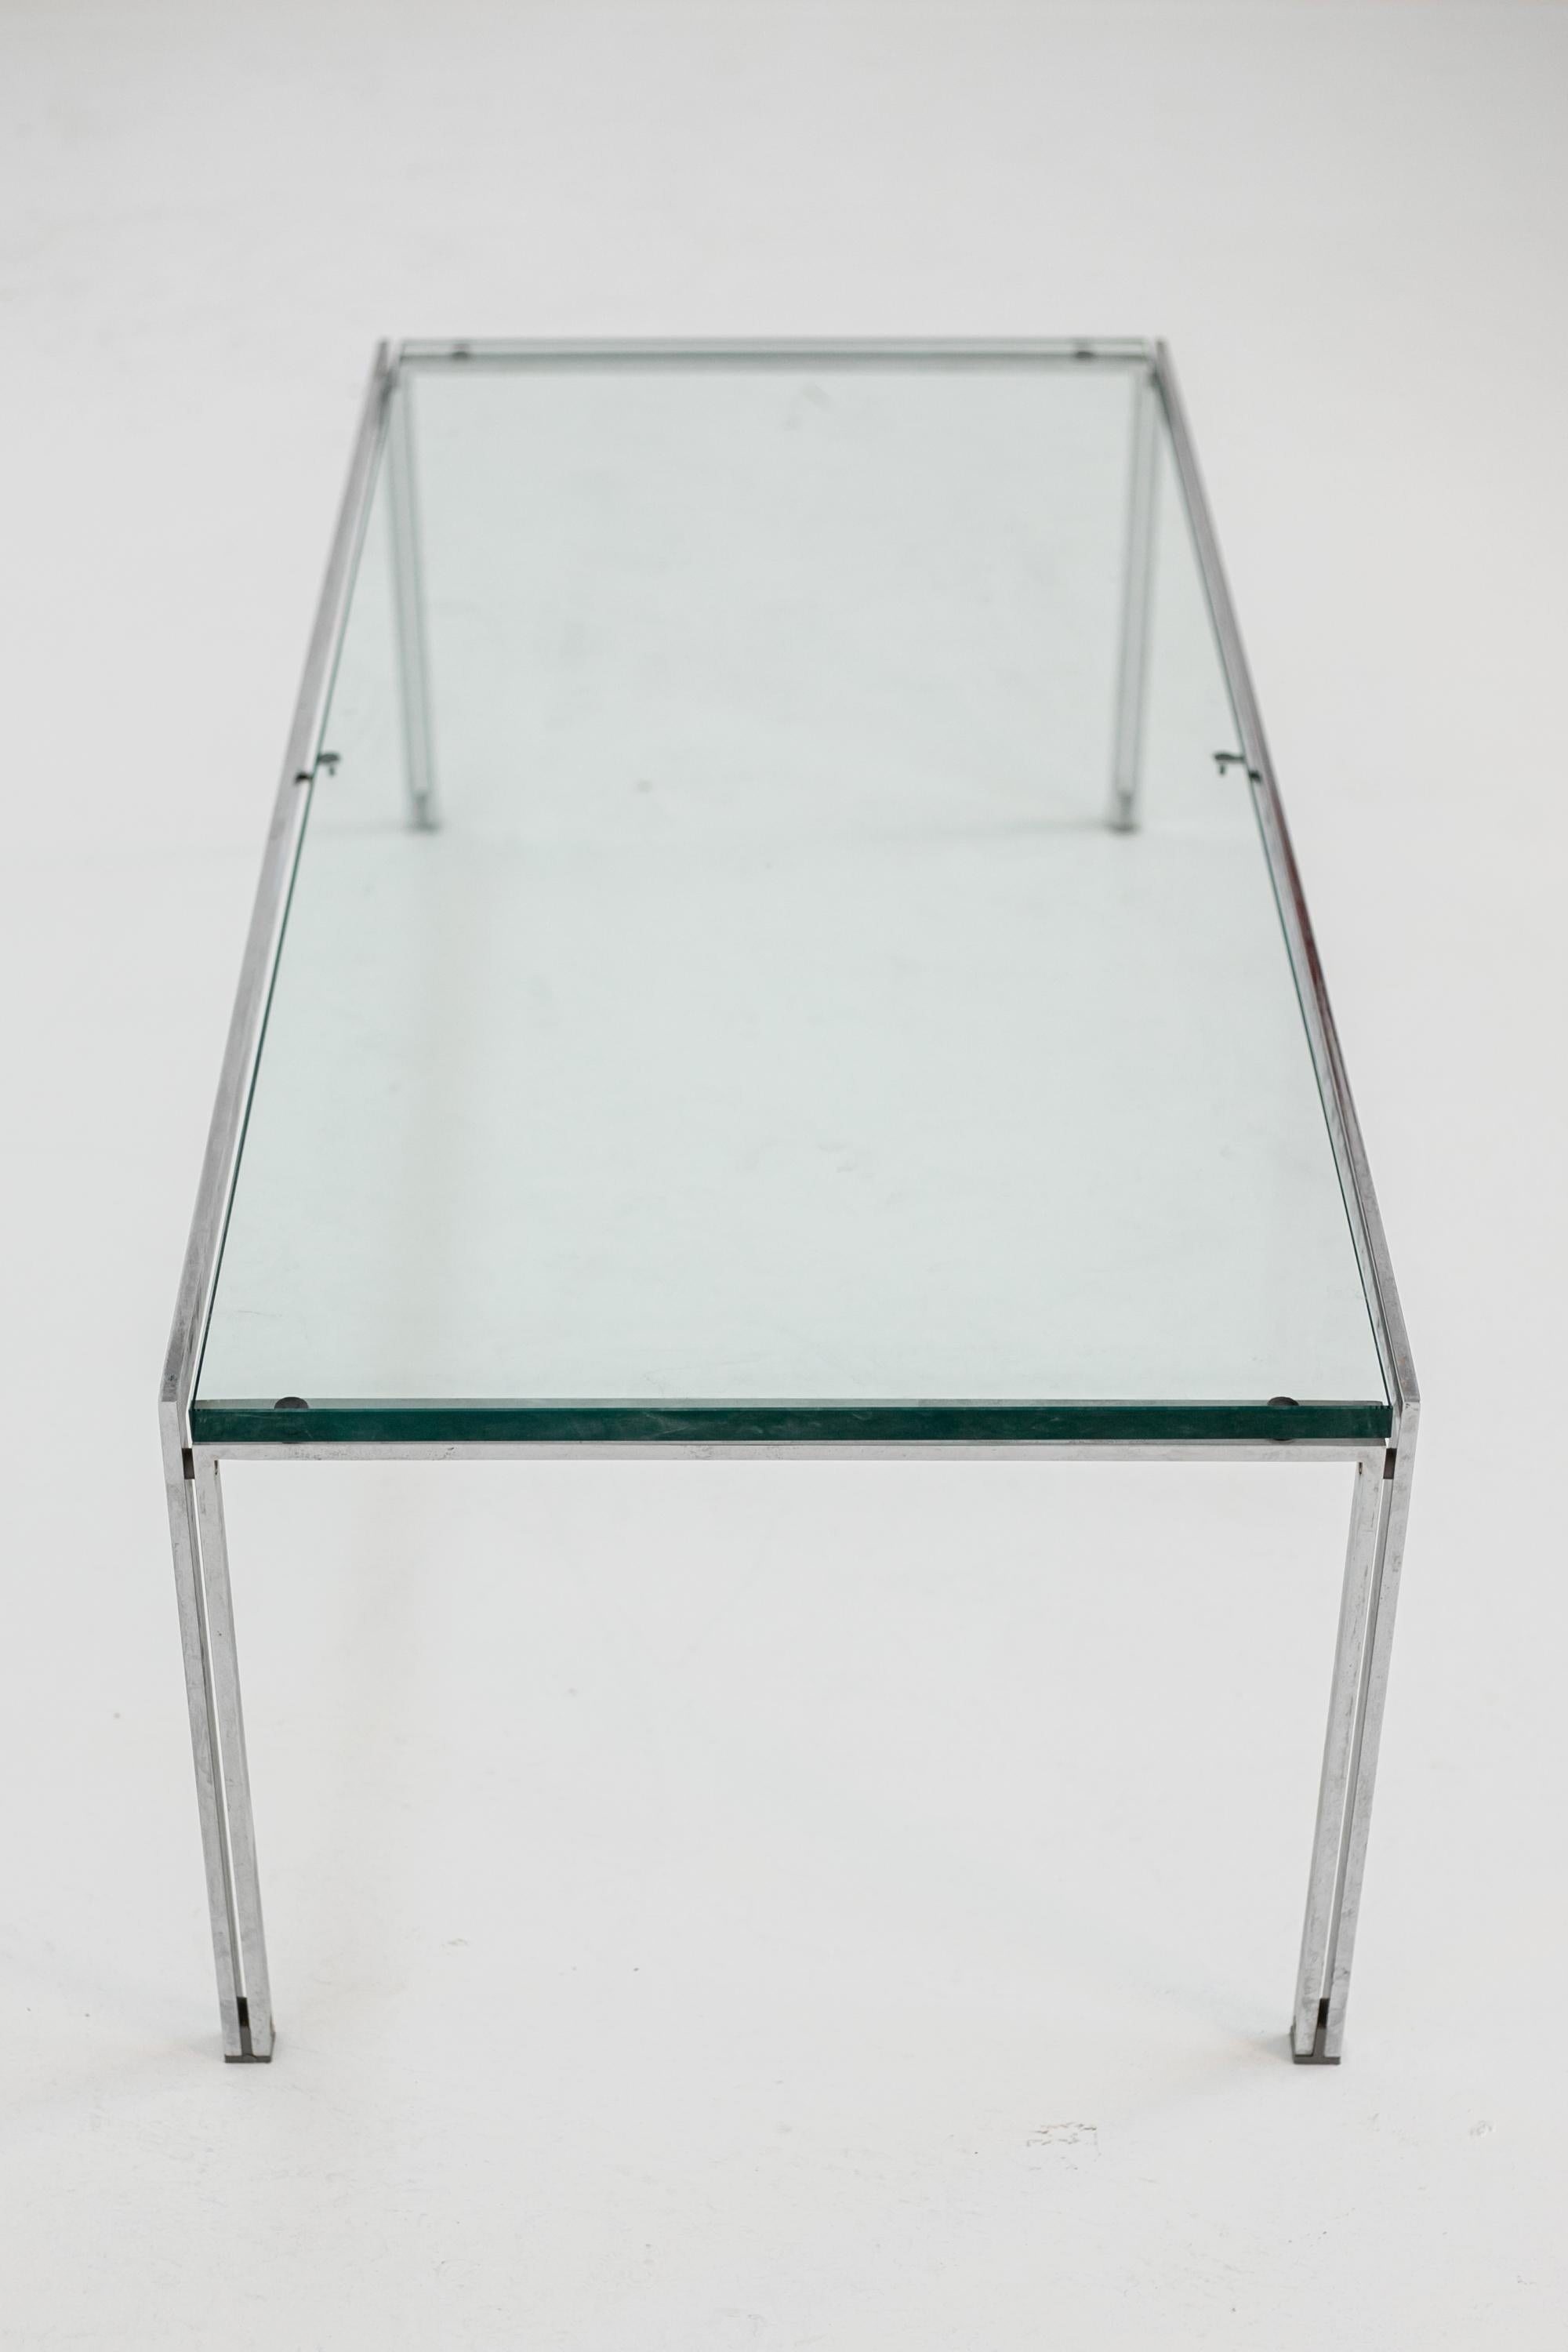 Low Living Room Table by Ross Littell for Depadova in Steel and Glass 3